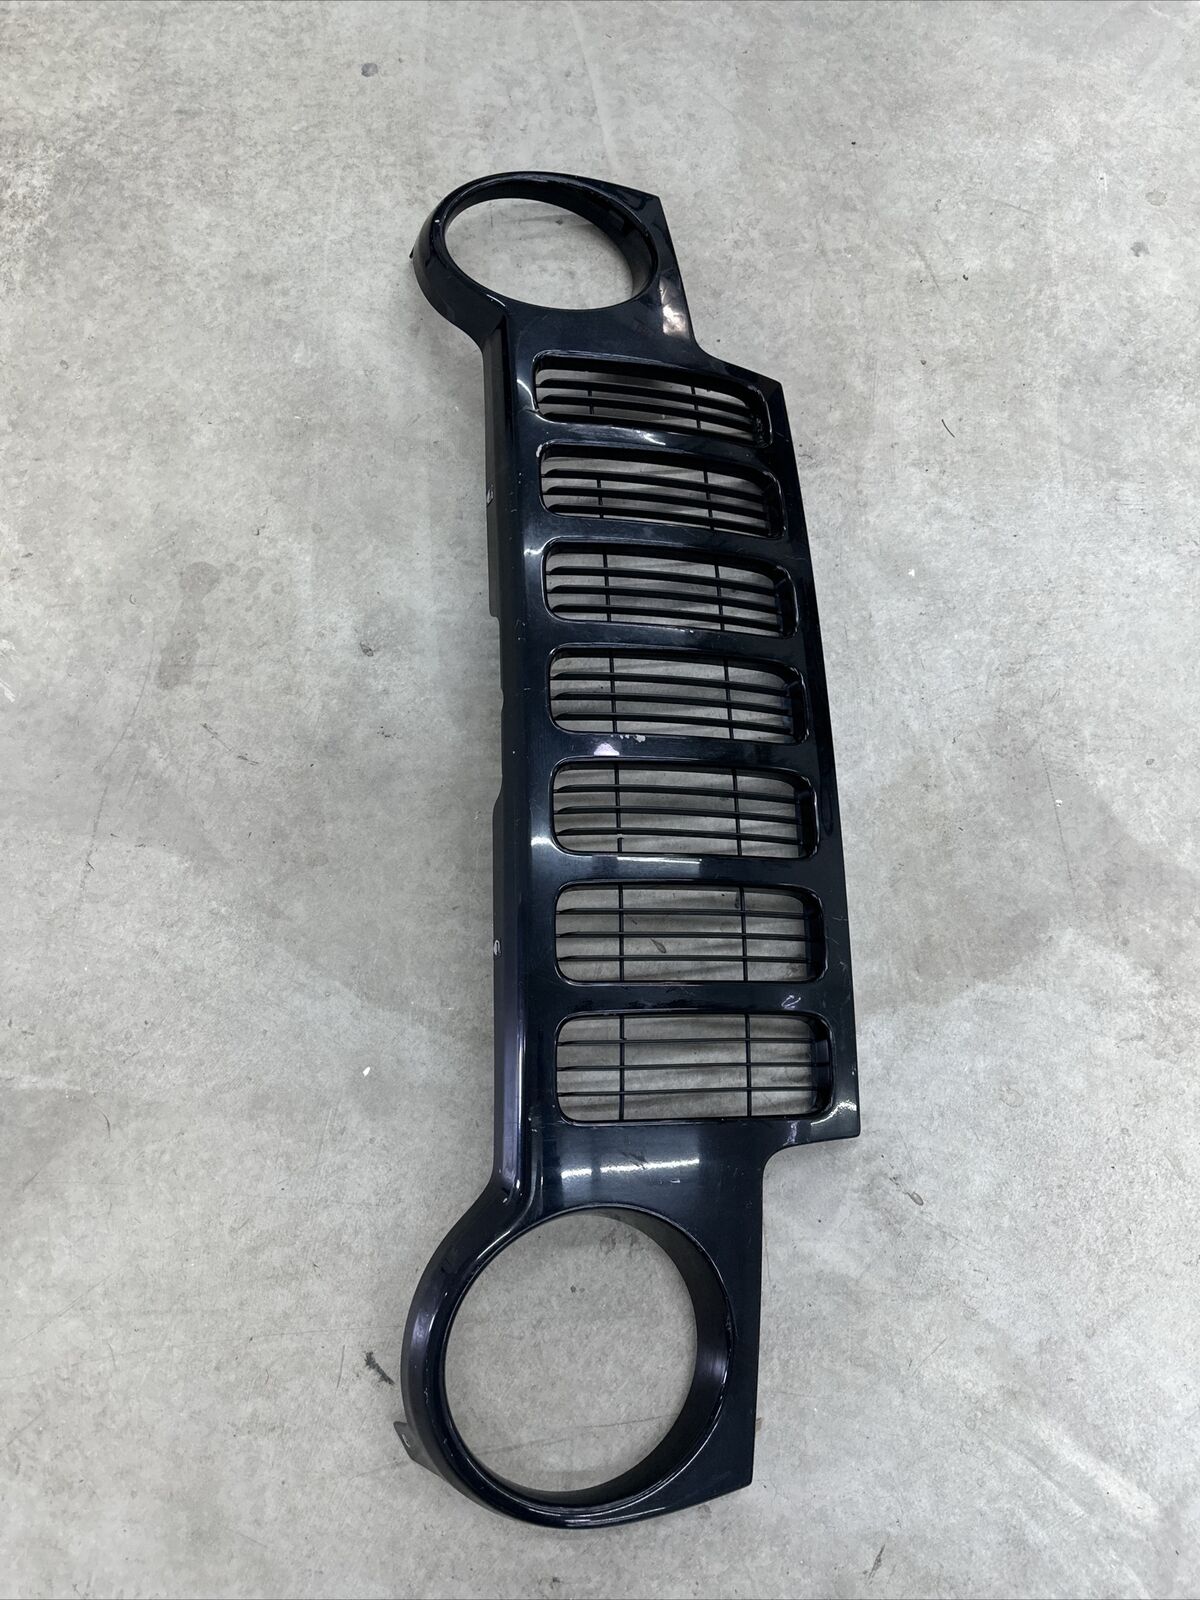 02-04 Jeep Liberty Front End Header Panel Radiator Grille PX8 OEM Black Read